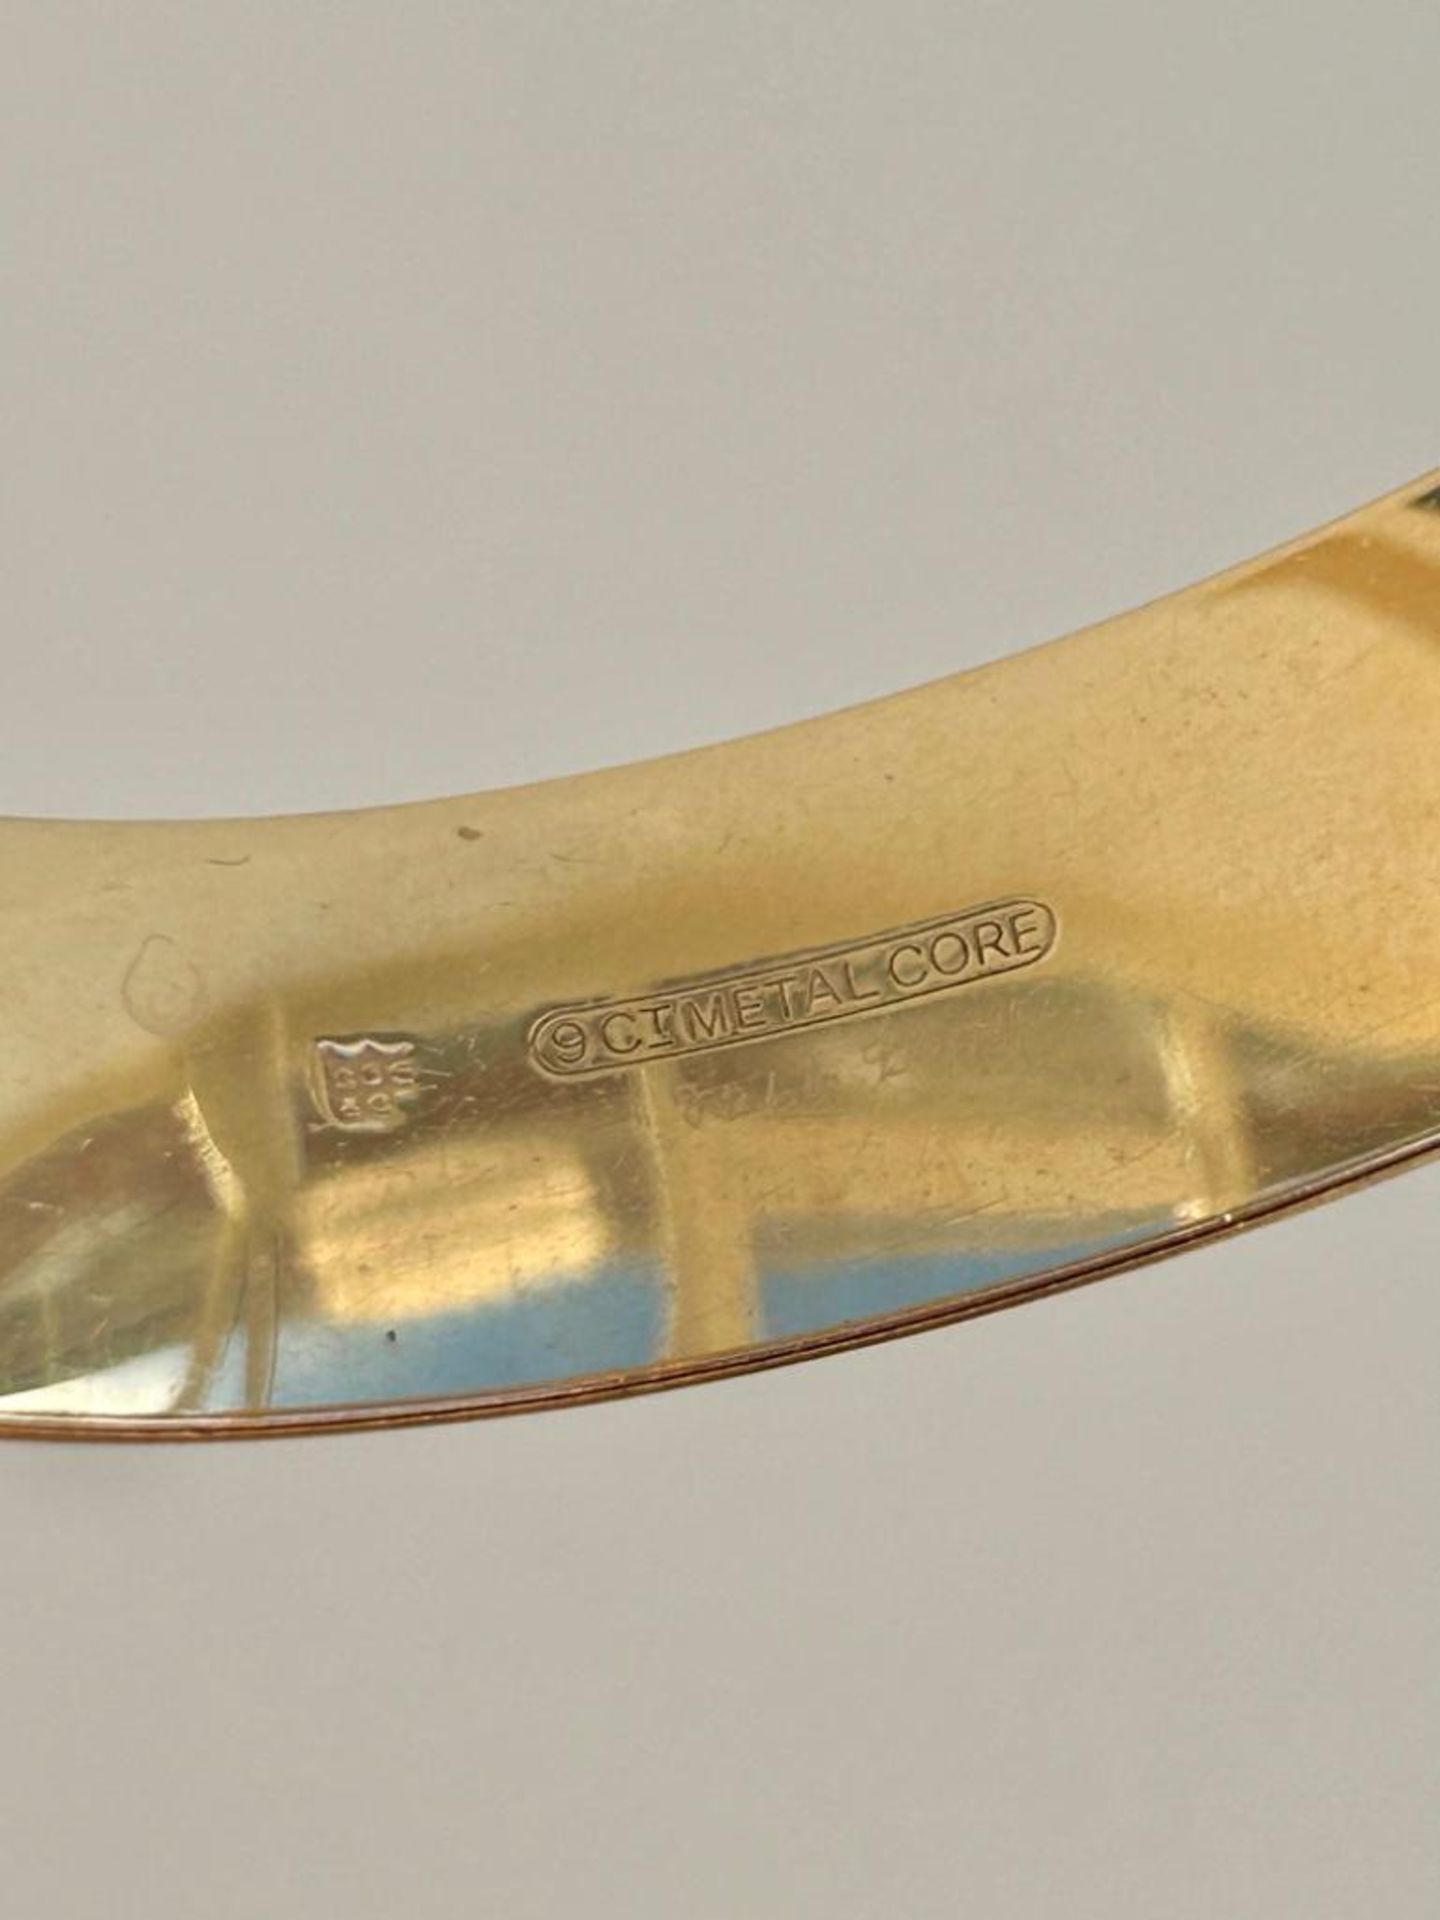 Charles Green & Sons 9ct Gold Metal Core Bangle - Image 5 of 8